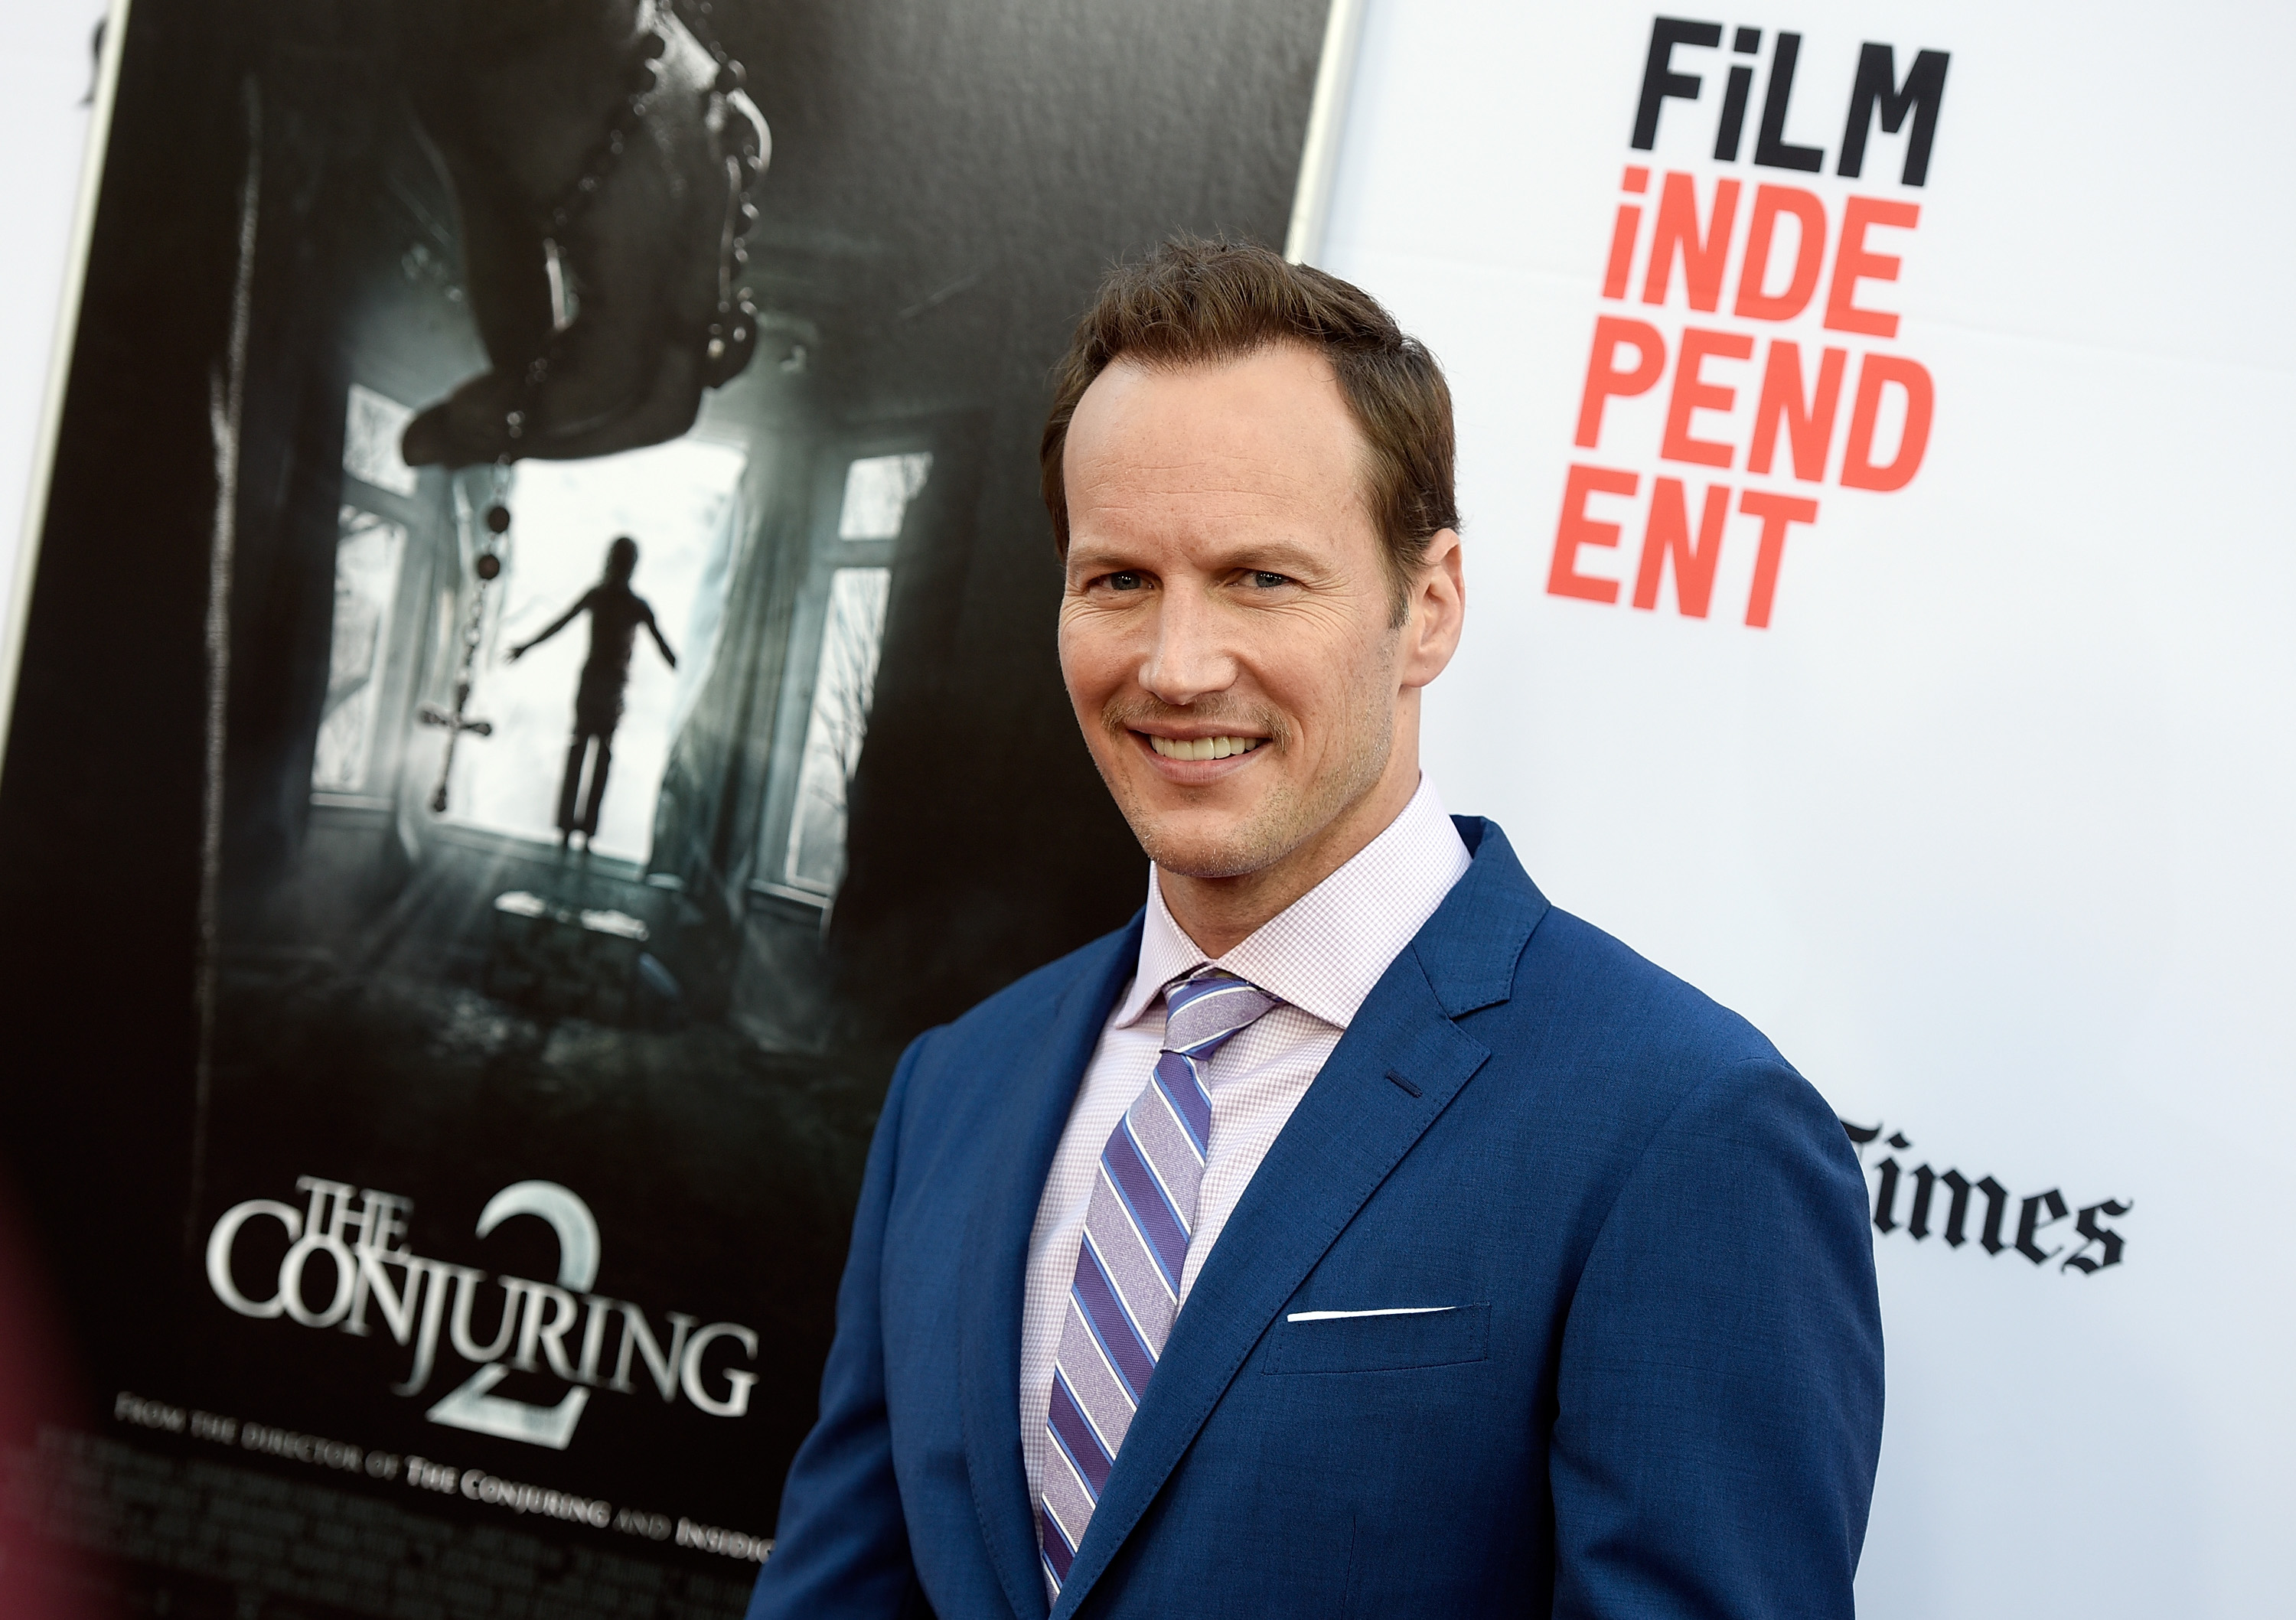 Actor Patrick Wilson attends the premiere of "The Conjuring 2" in Hollywood, California, on June 7, 2016. / AFP PHOTO / ANGELA WEISS